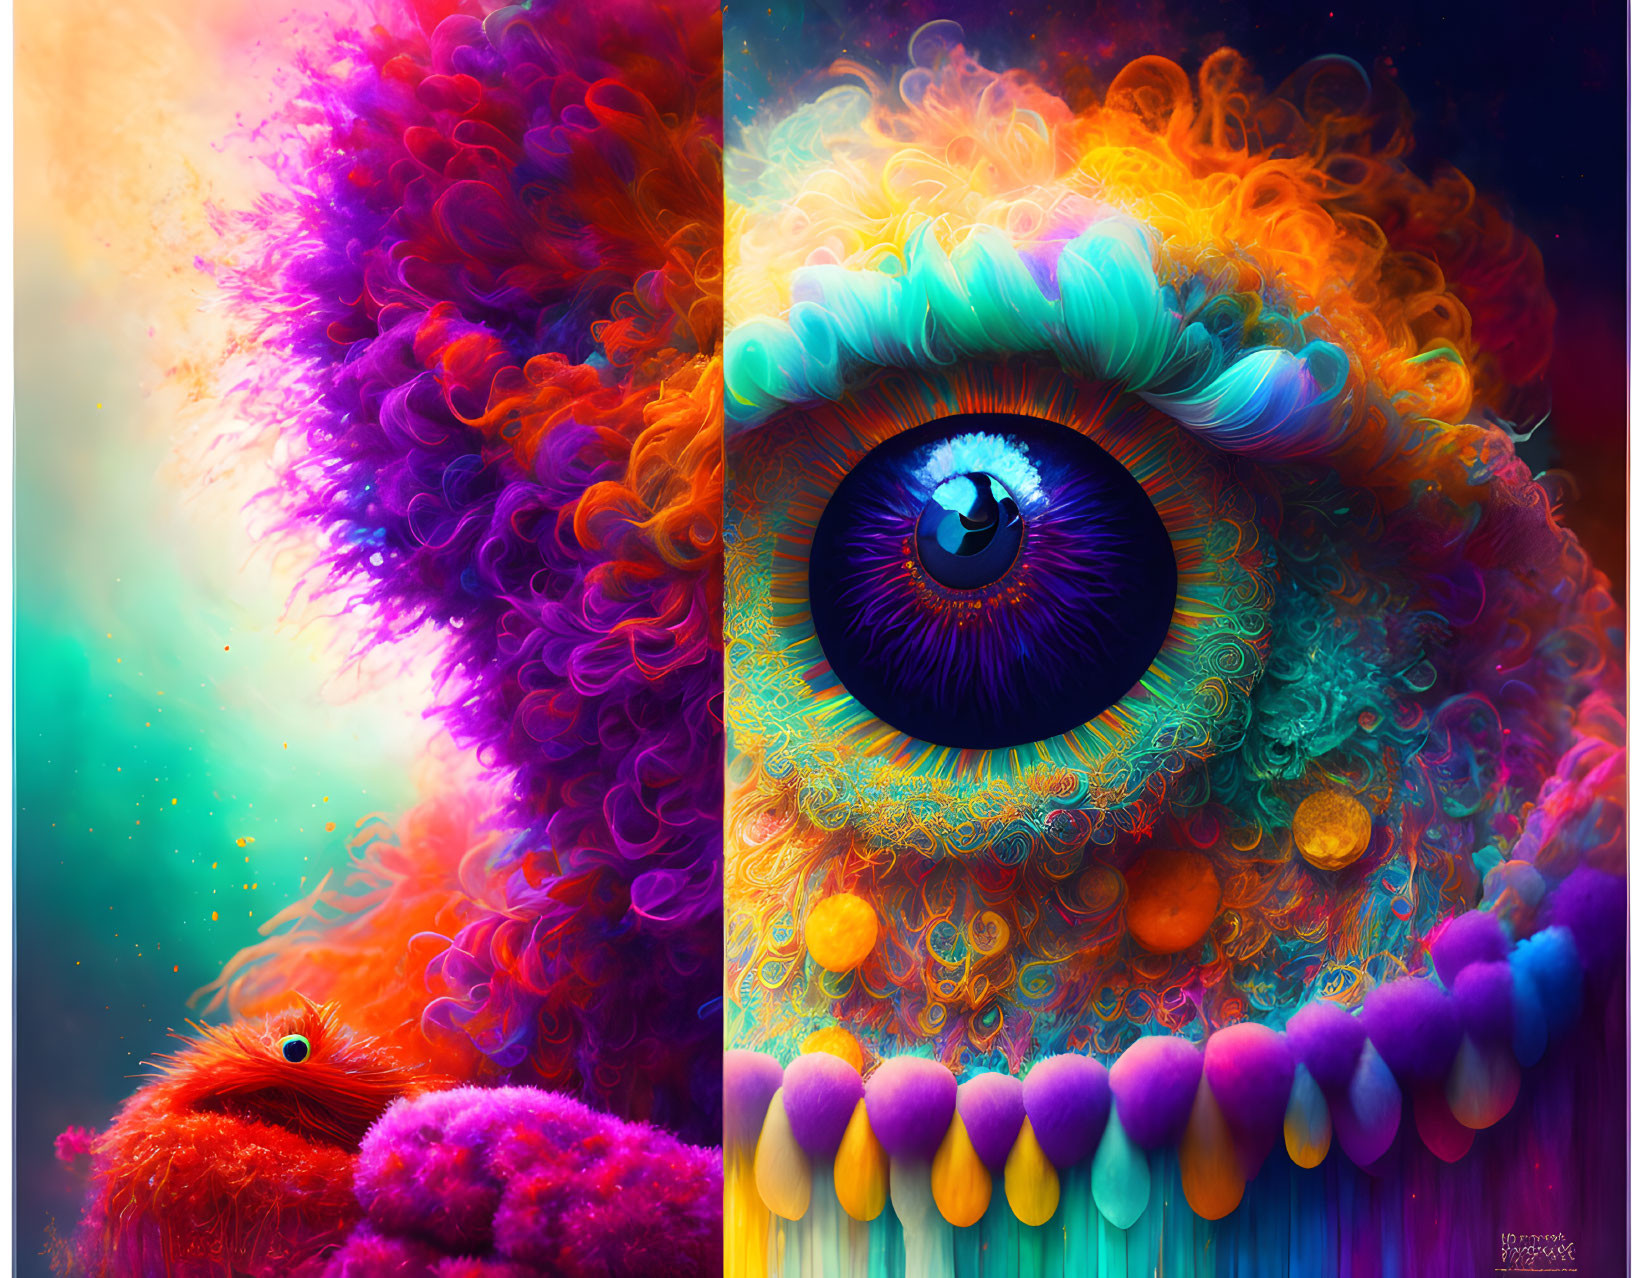 Colorful Creature Illustration with Detailed Eye and Dreamlike Background